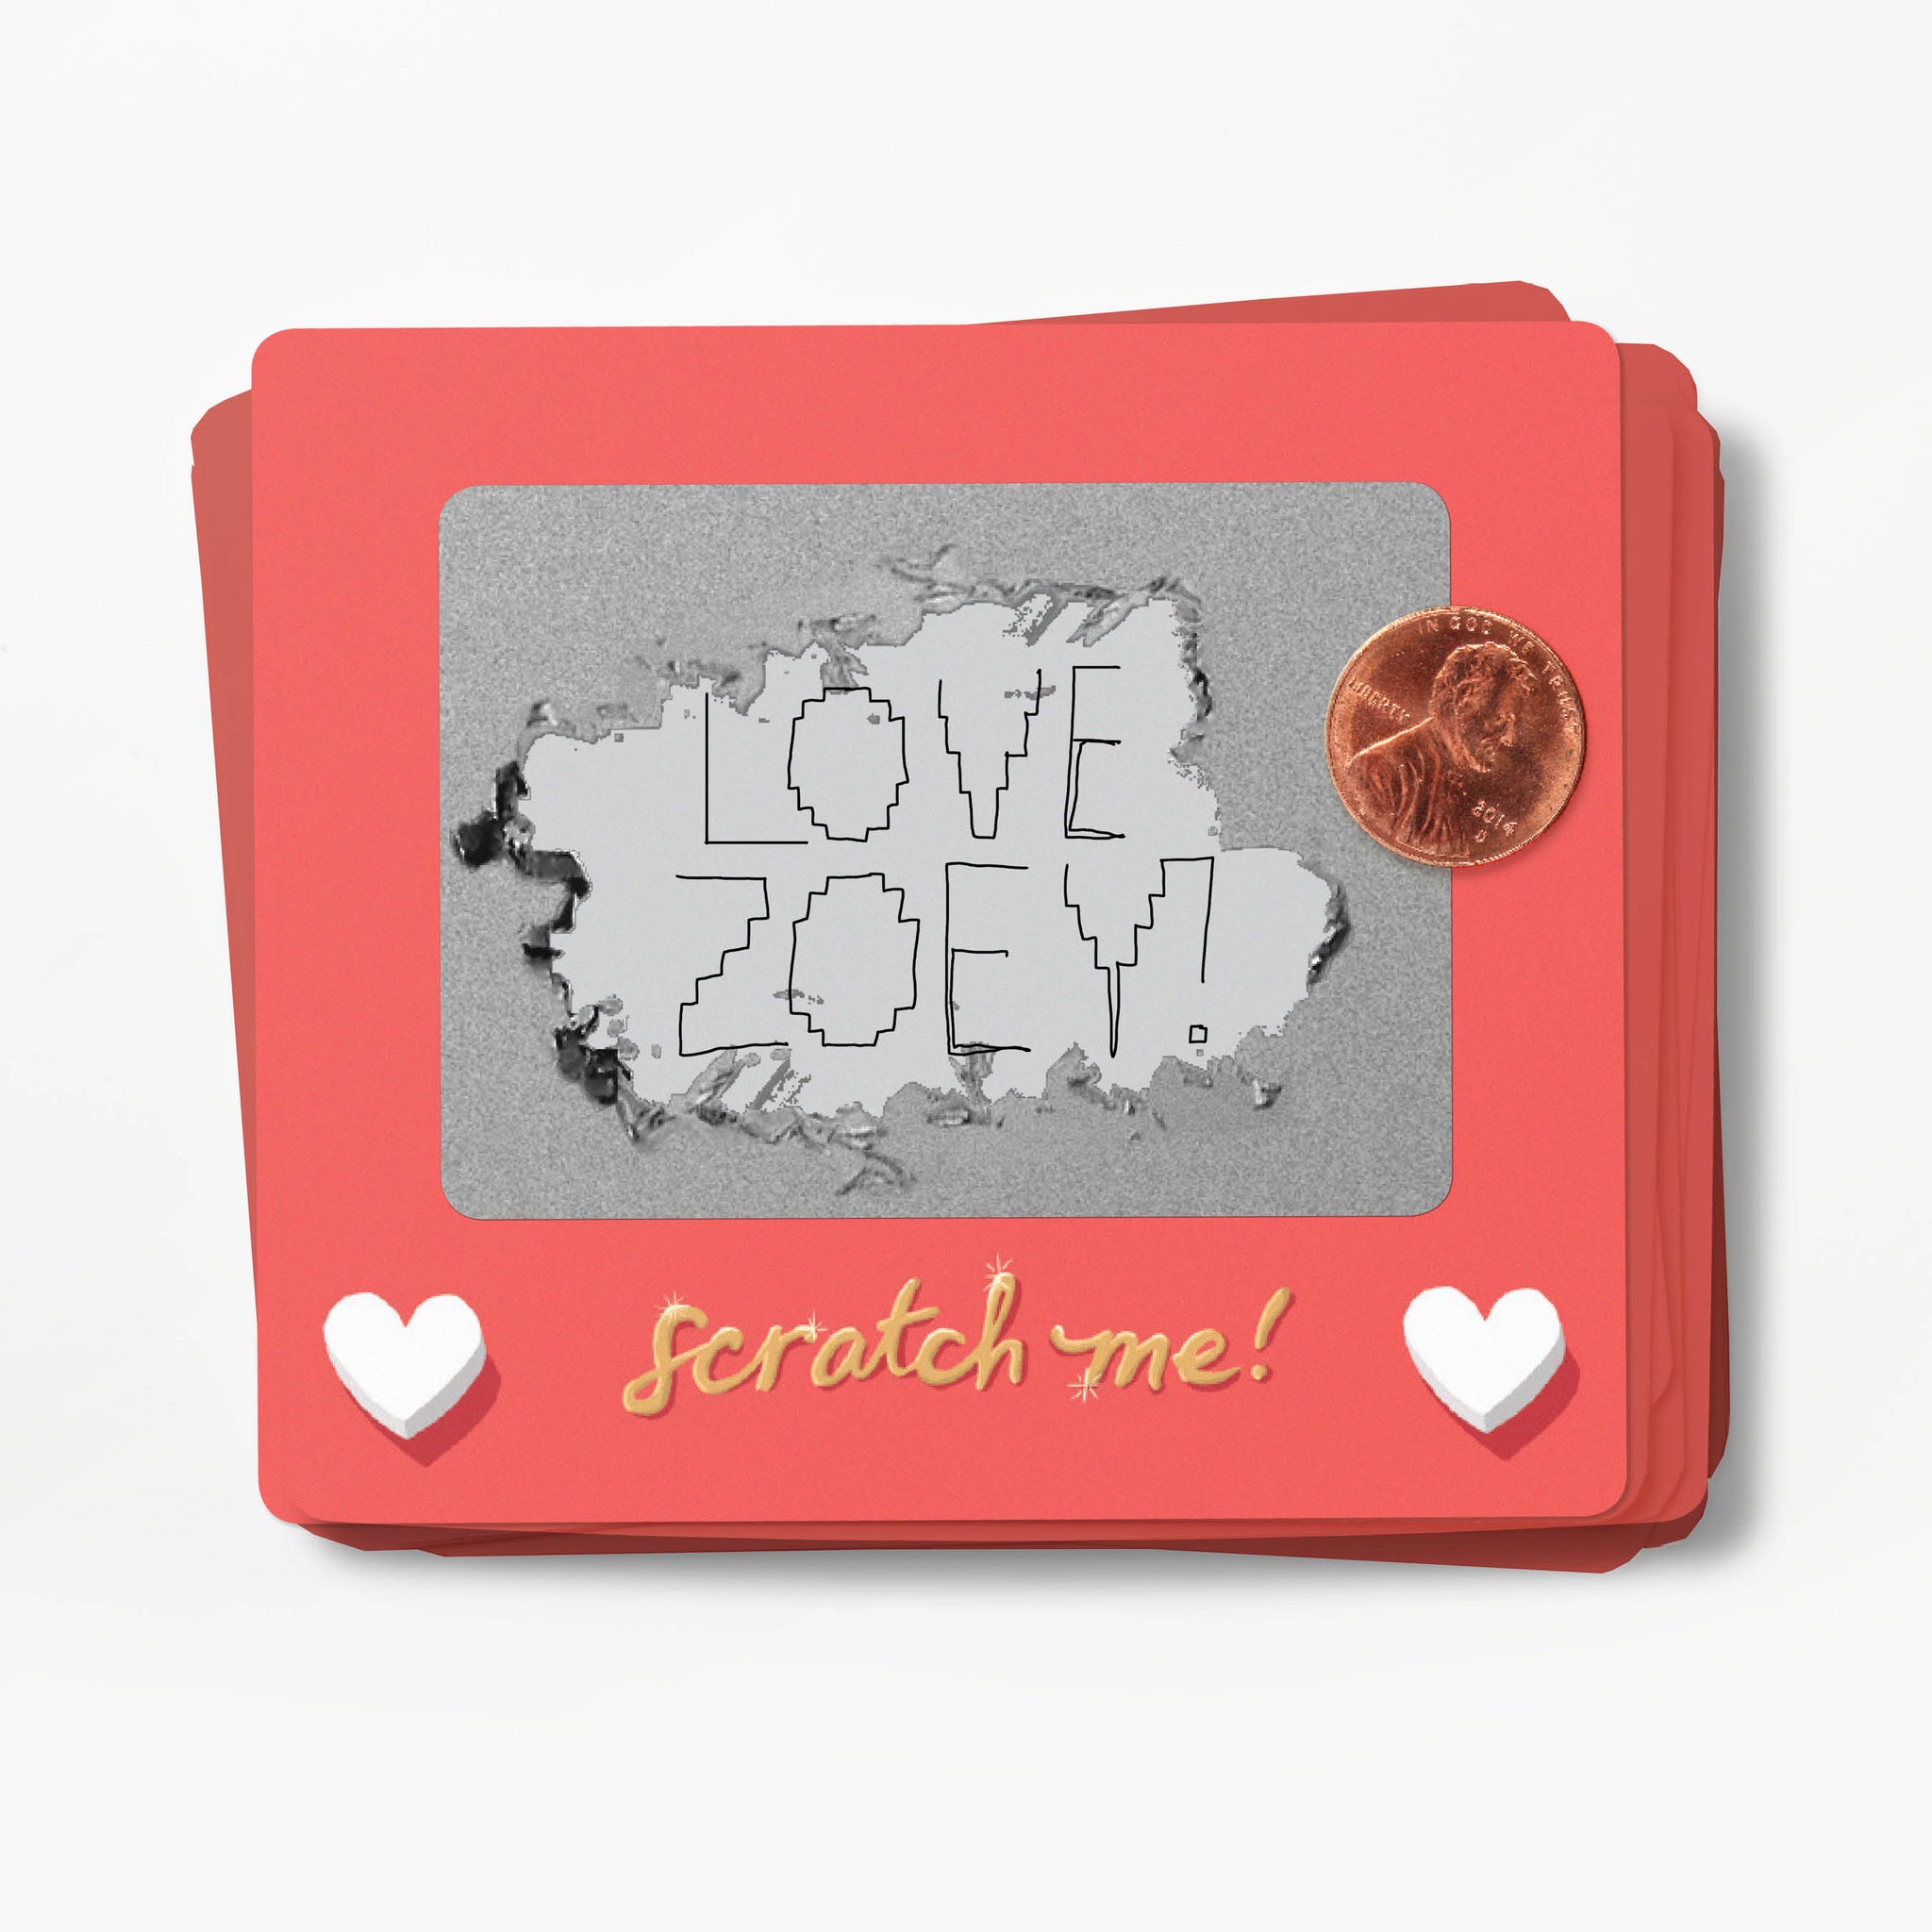 Scratch A Sketch Valentines – Inklings Paperie